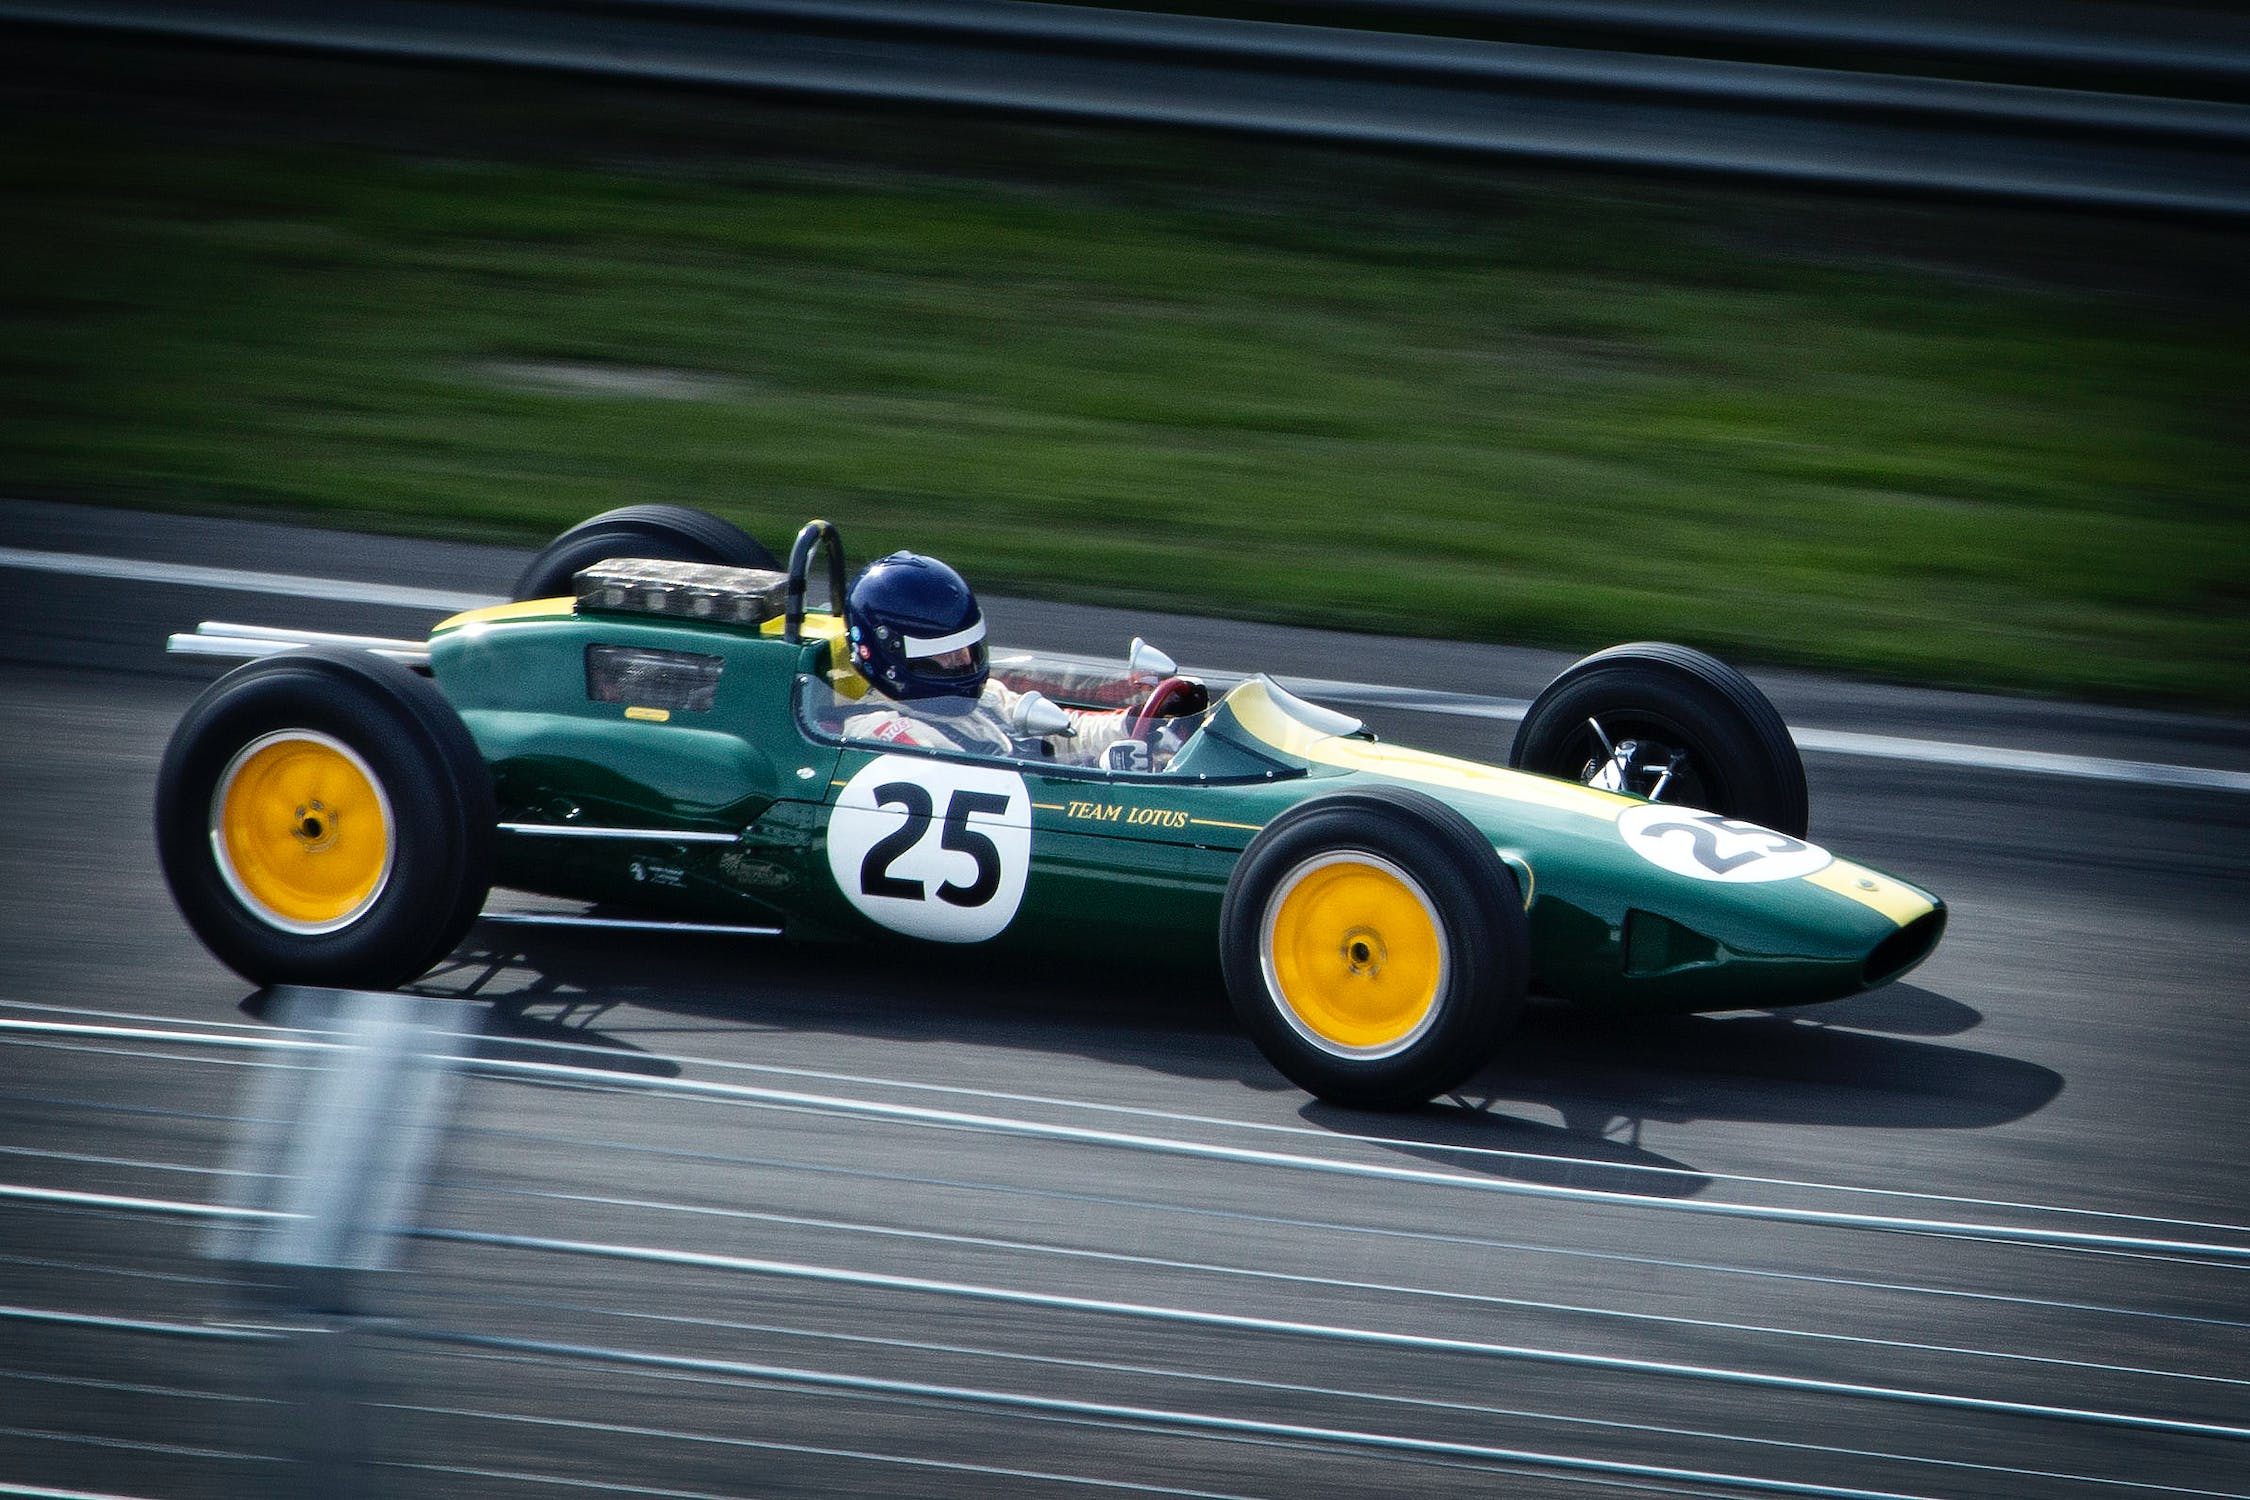 A green racing car with the number 25 on the side